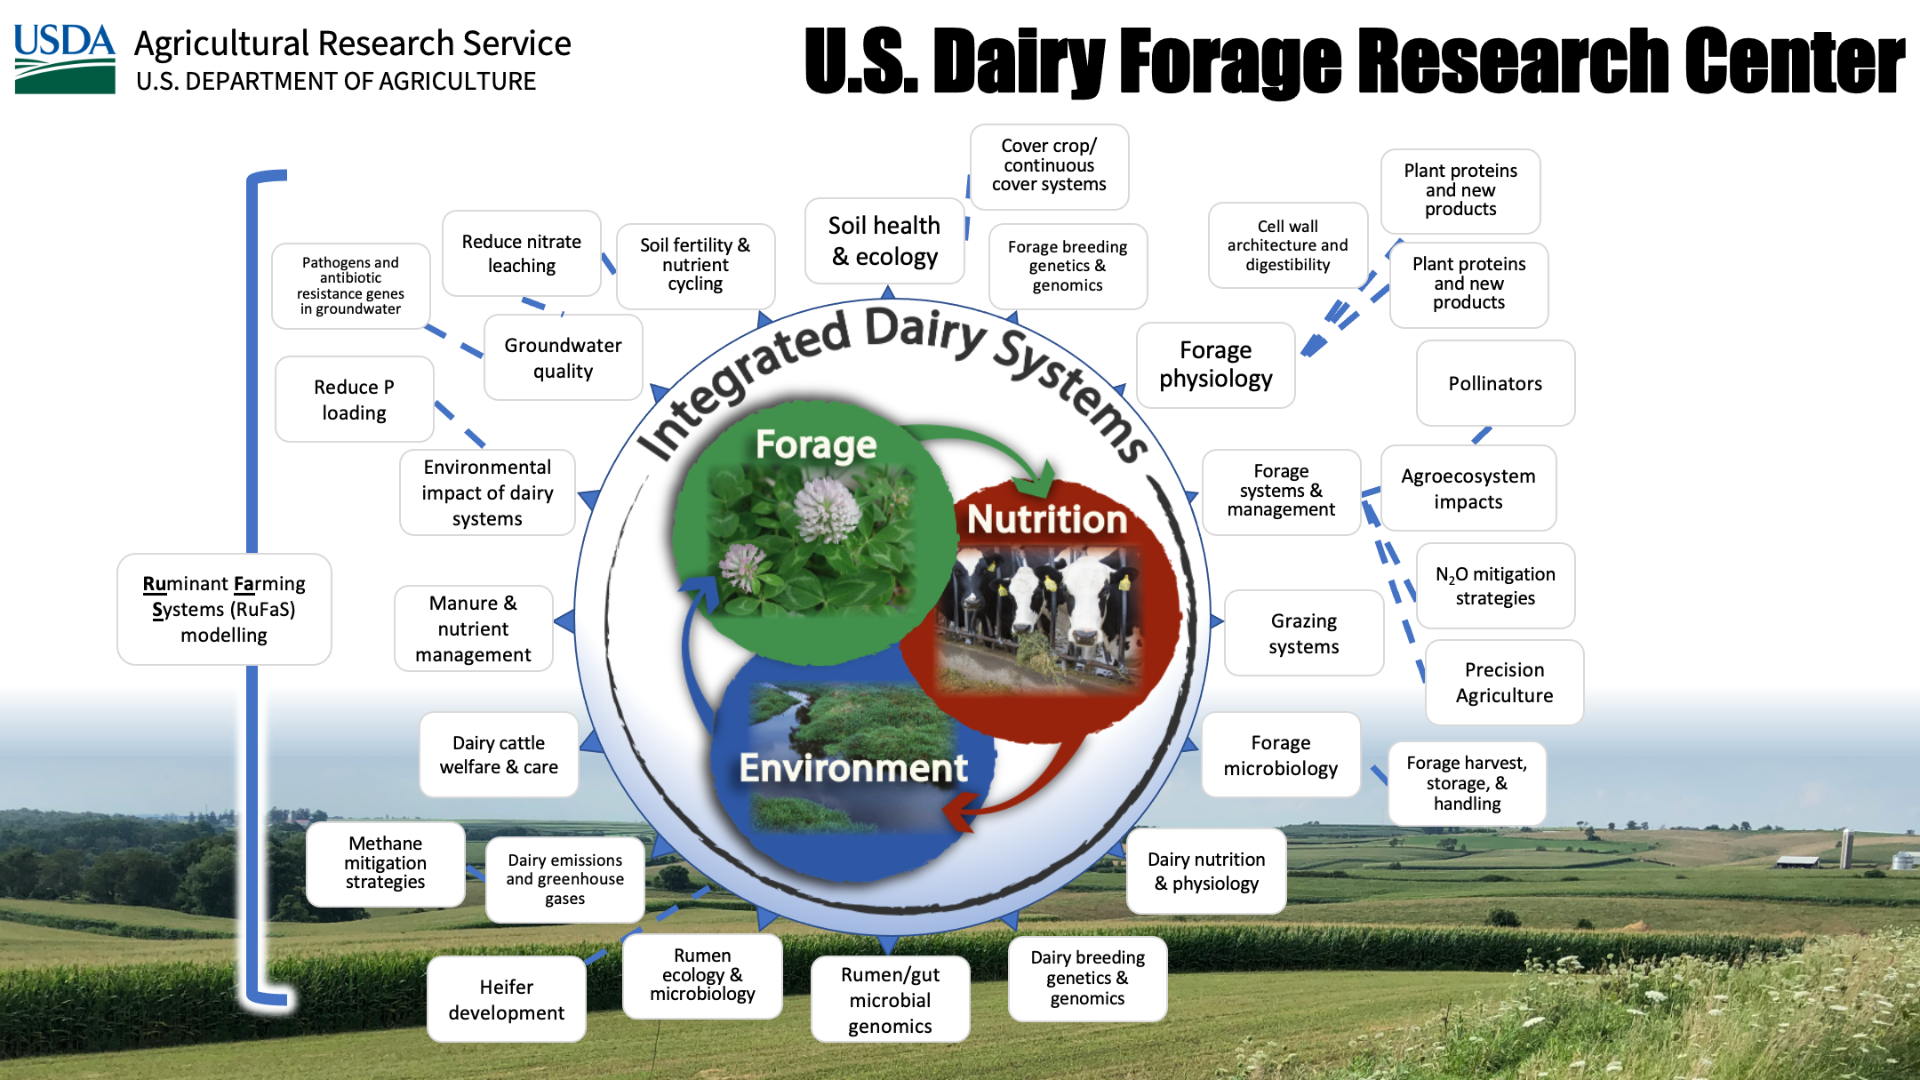 /ARSUserFiles/50901500/New Dairy/USDFRC Research Topics.png